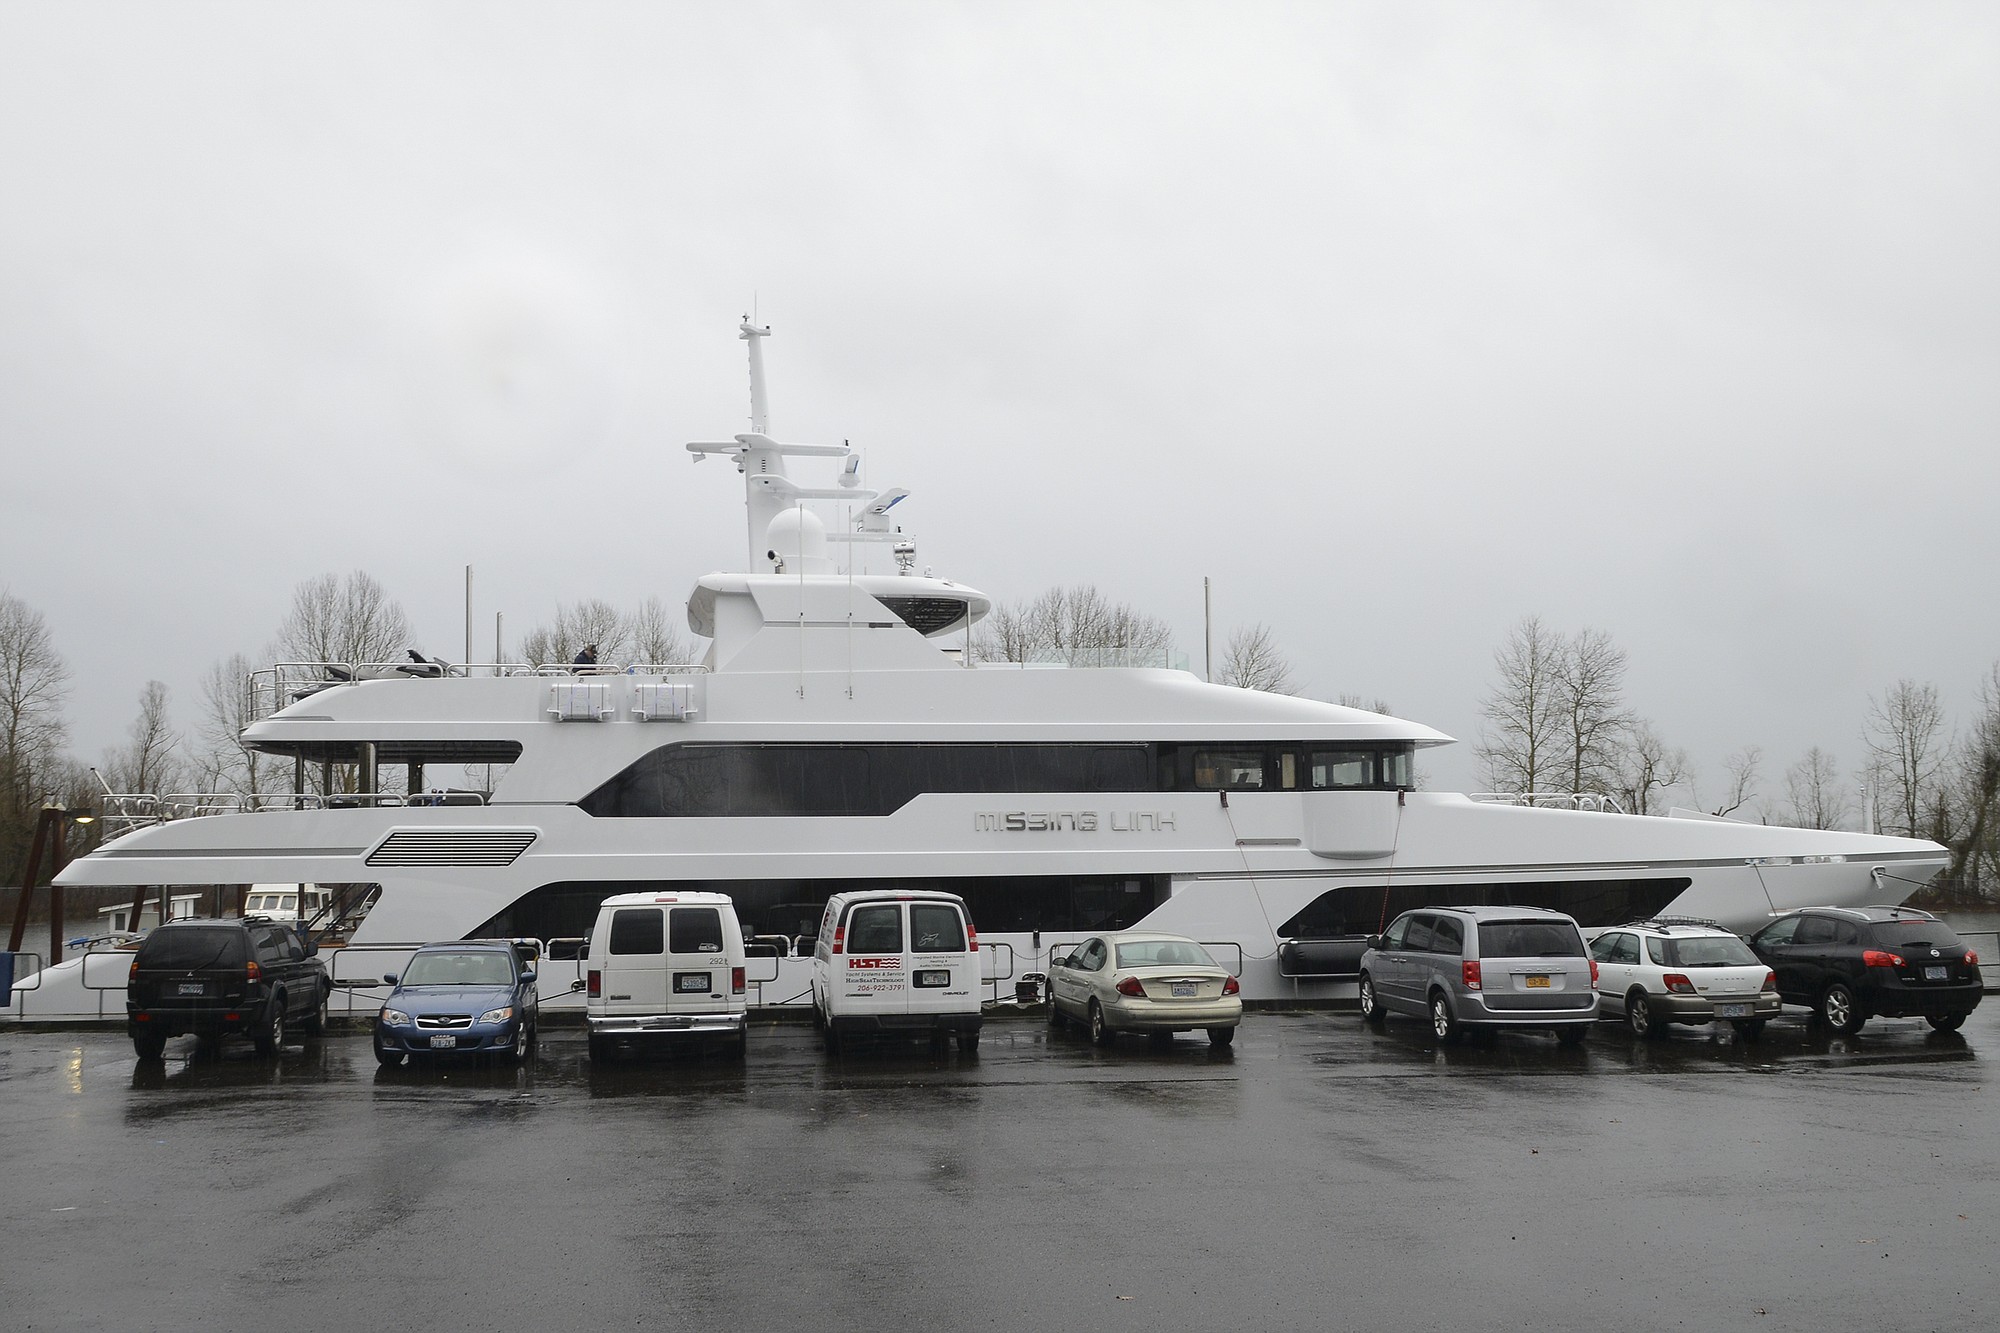 Workers arrived early Monday morning at Christensen Shipyards, the Vancouver-based builder of custom yachts, to find the gates locked. The manufacturing plant was closed although it appeared work was being done on a Christensen yacht, &quot;Missing Link,&quot; which was in the Columbia River nearby.